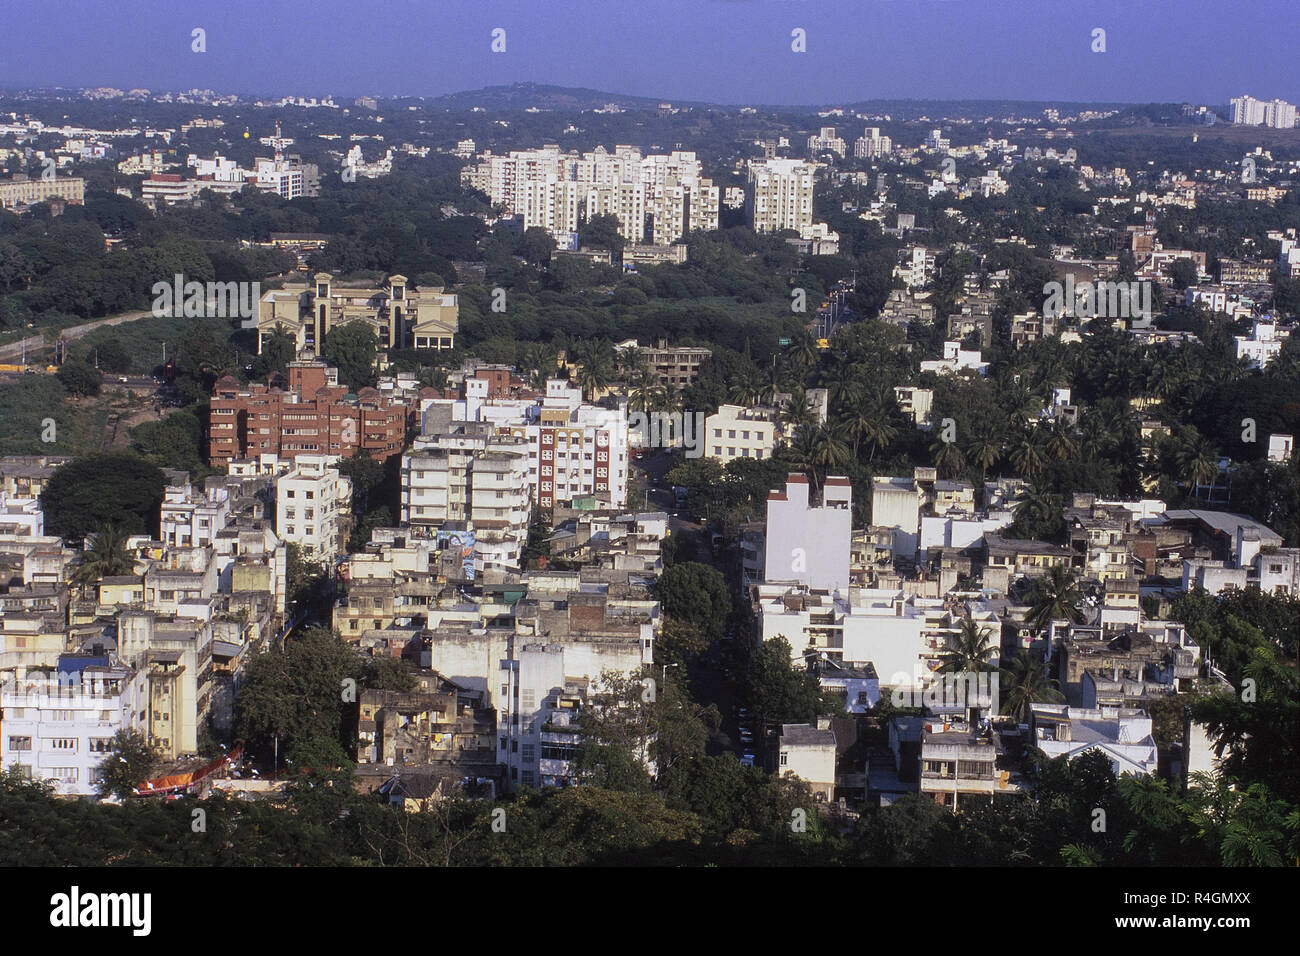 Aerial view of crowded cityscape of city from Parvati Hills, Pune, Maharashtra, India, Asia Stock Photo